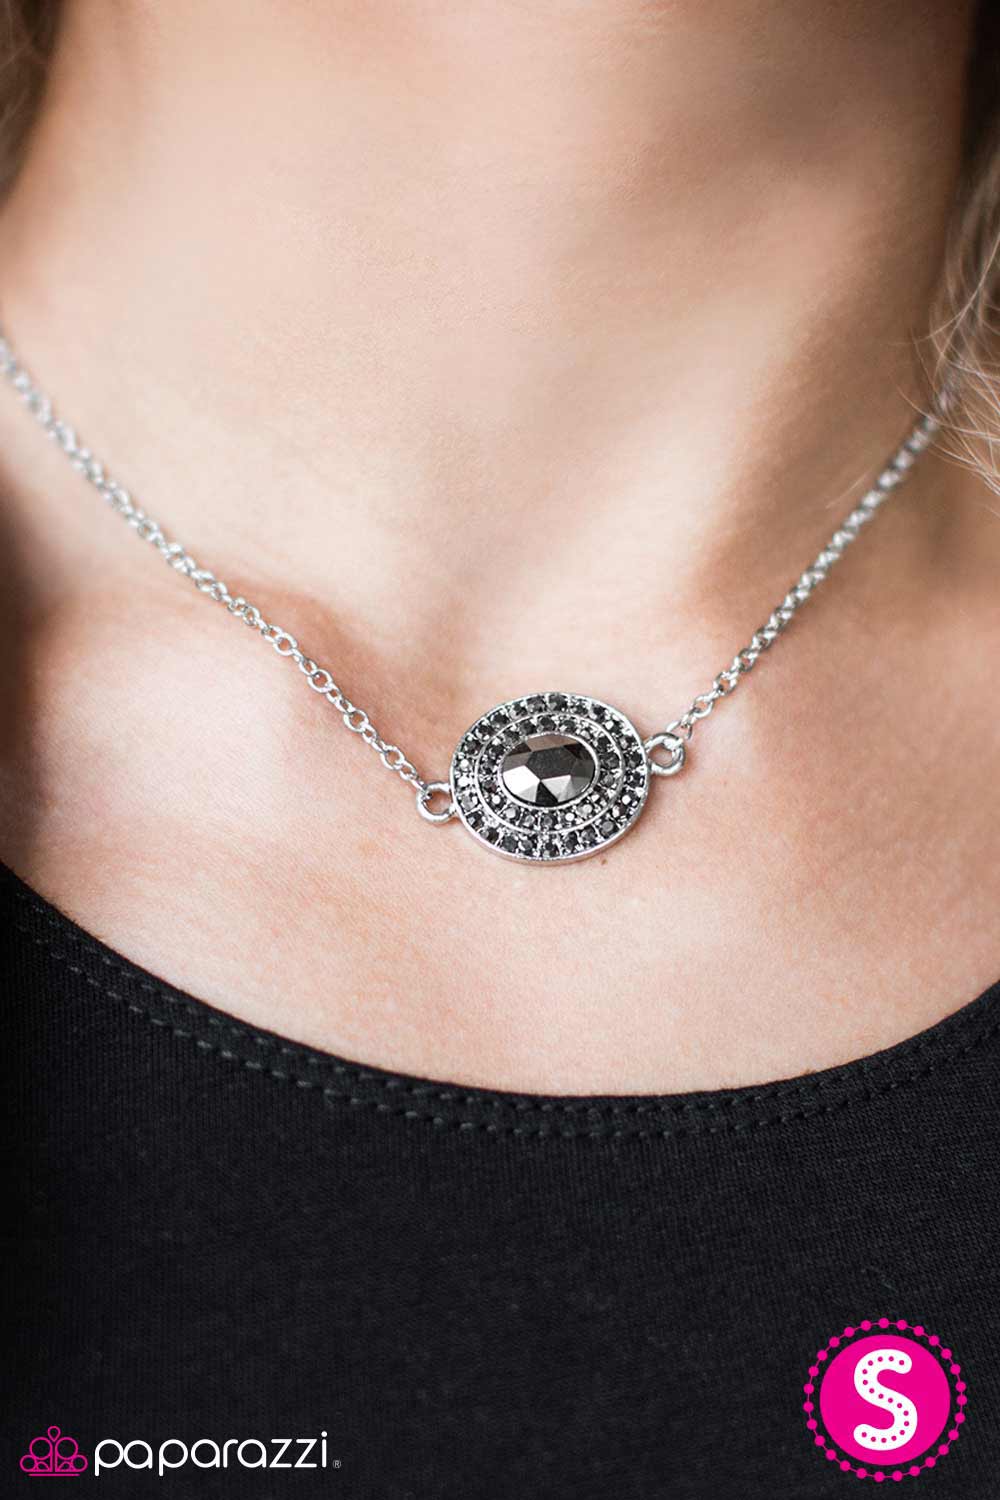 All The Grandeur In The World - Silver - Paparazzi necklace